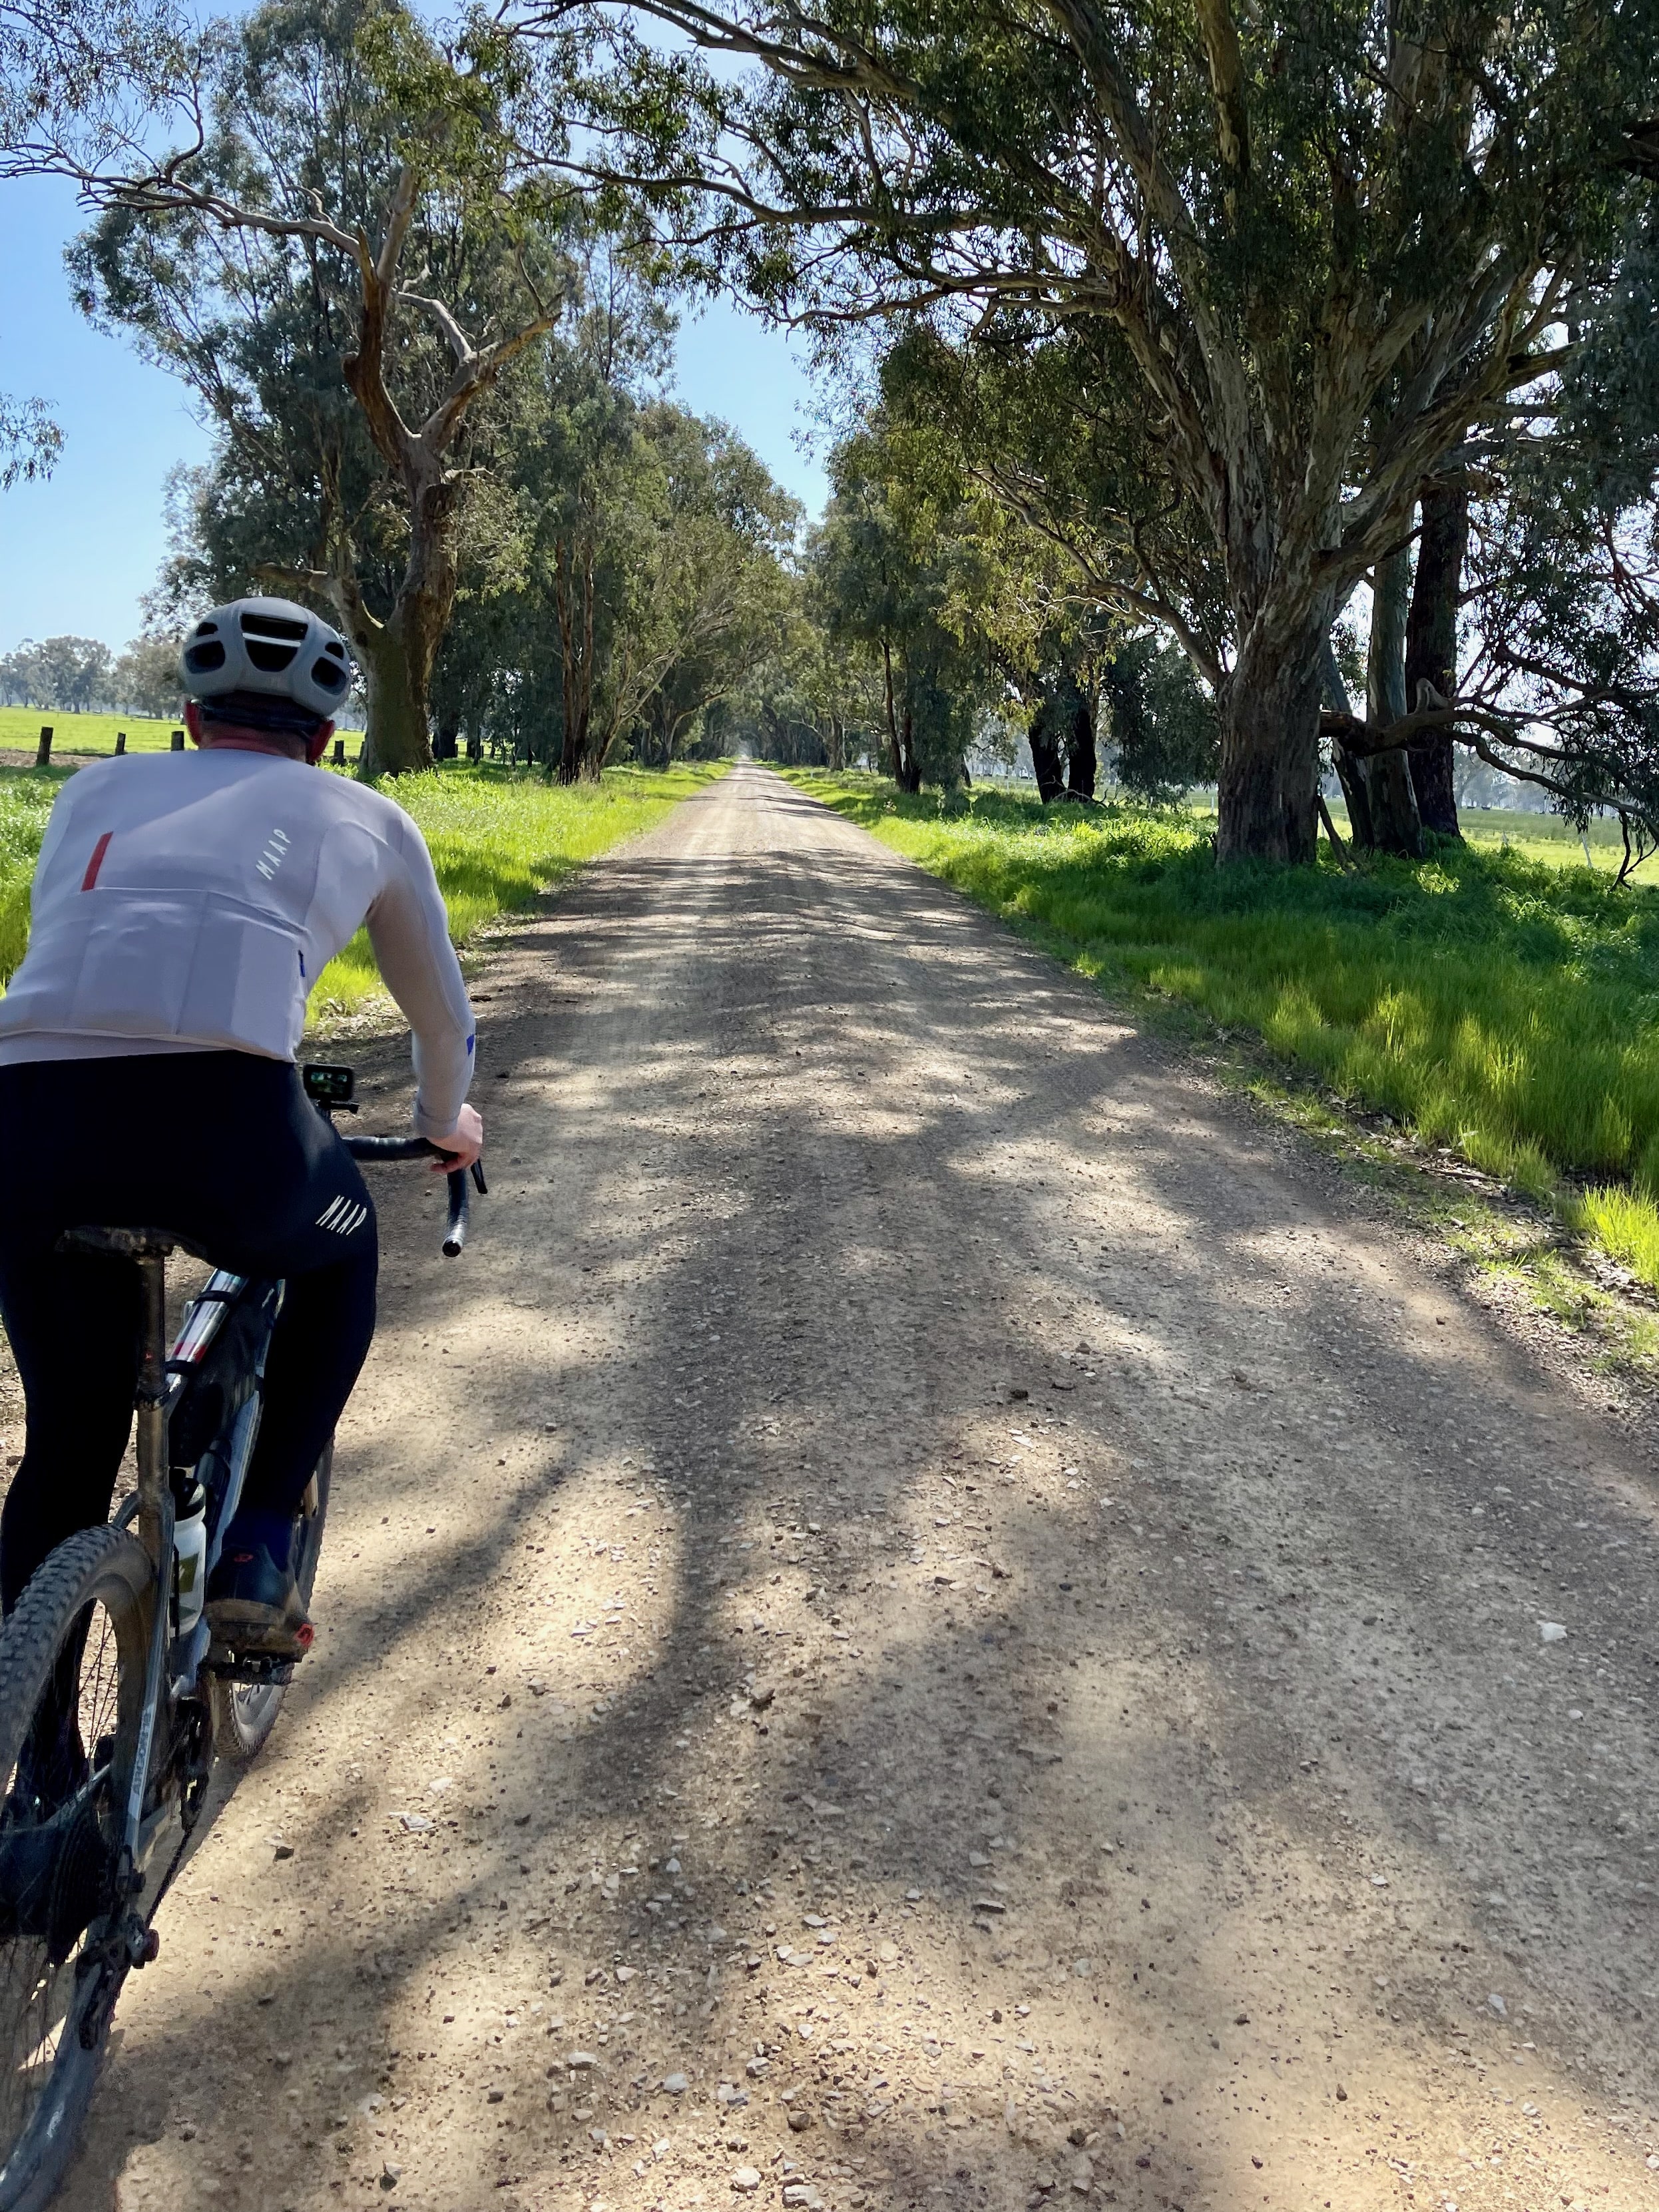 Cyclist gravel riding on a smooth gravel road with native trees providing shade